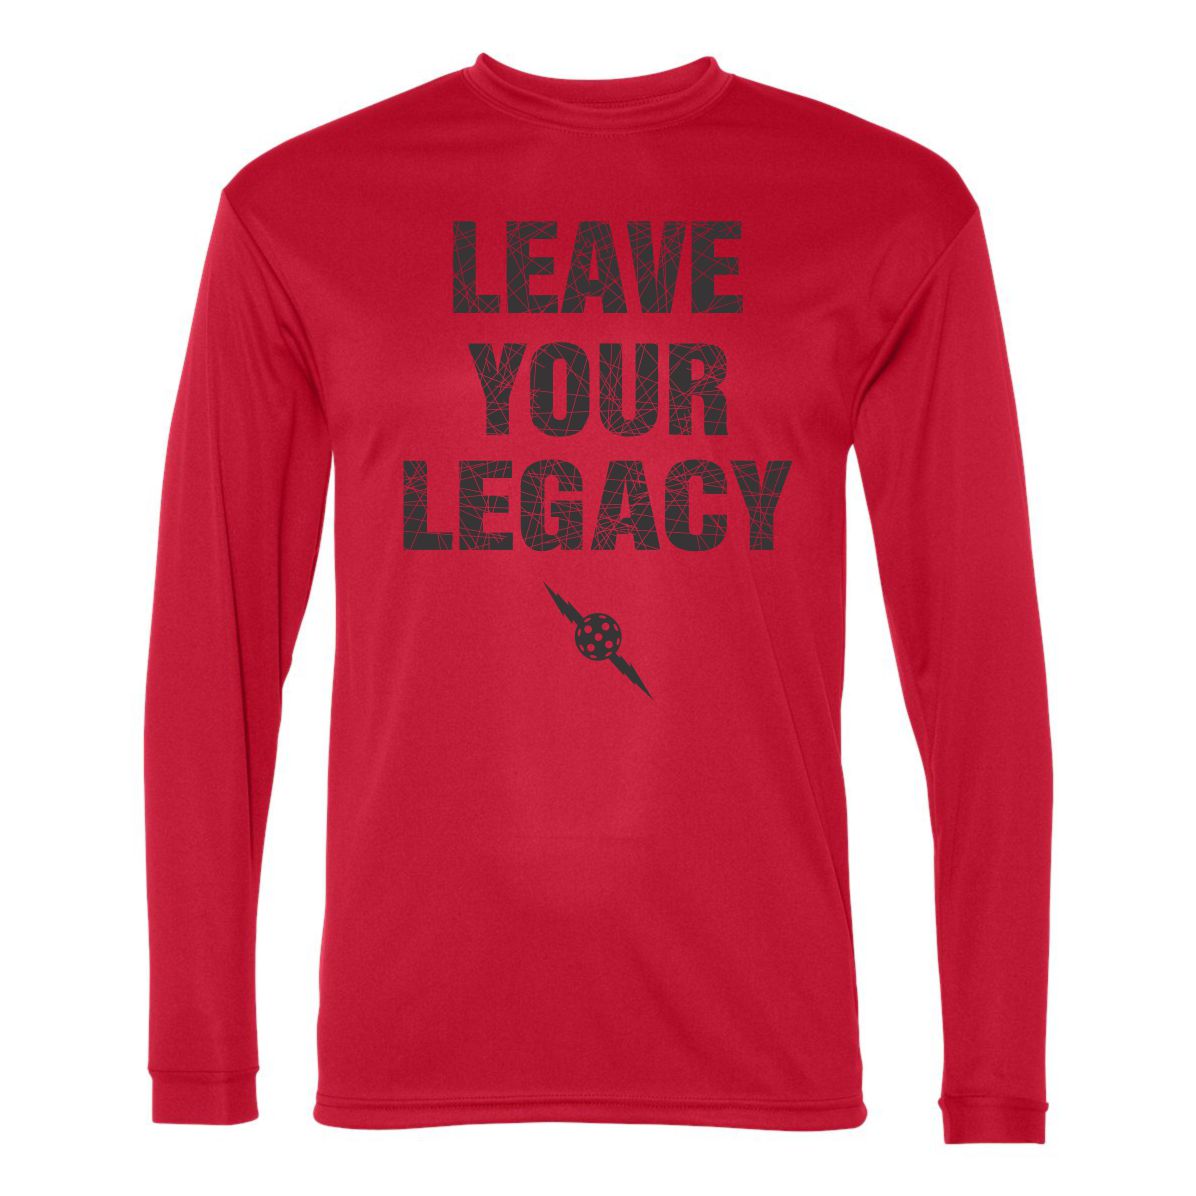 Leave Your Legacy Men's Long Sleeve Shirt